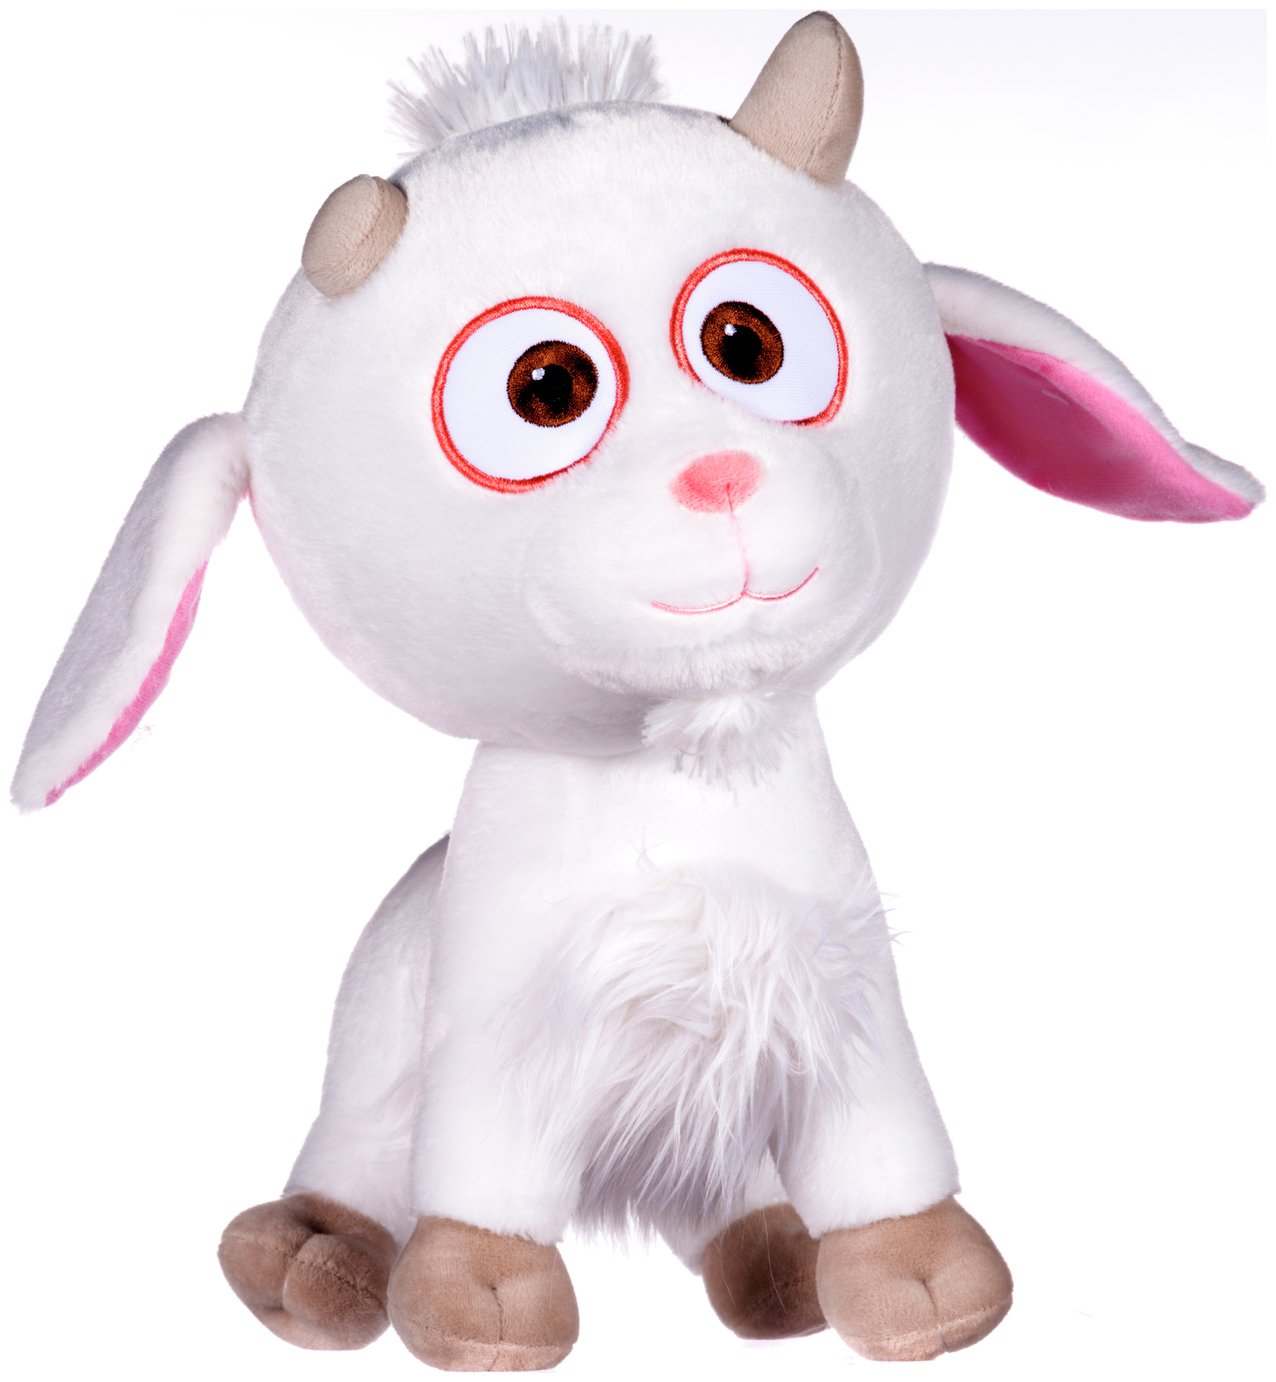 goat from despicable me